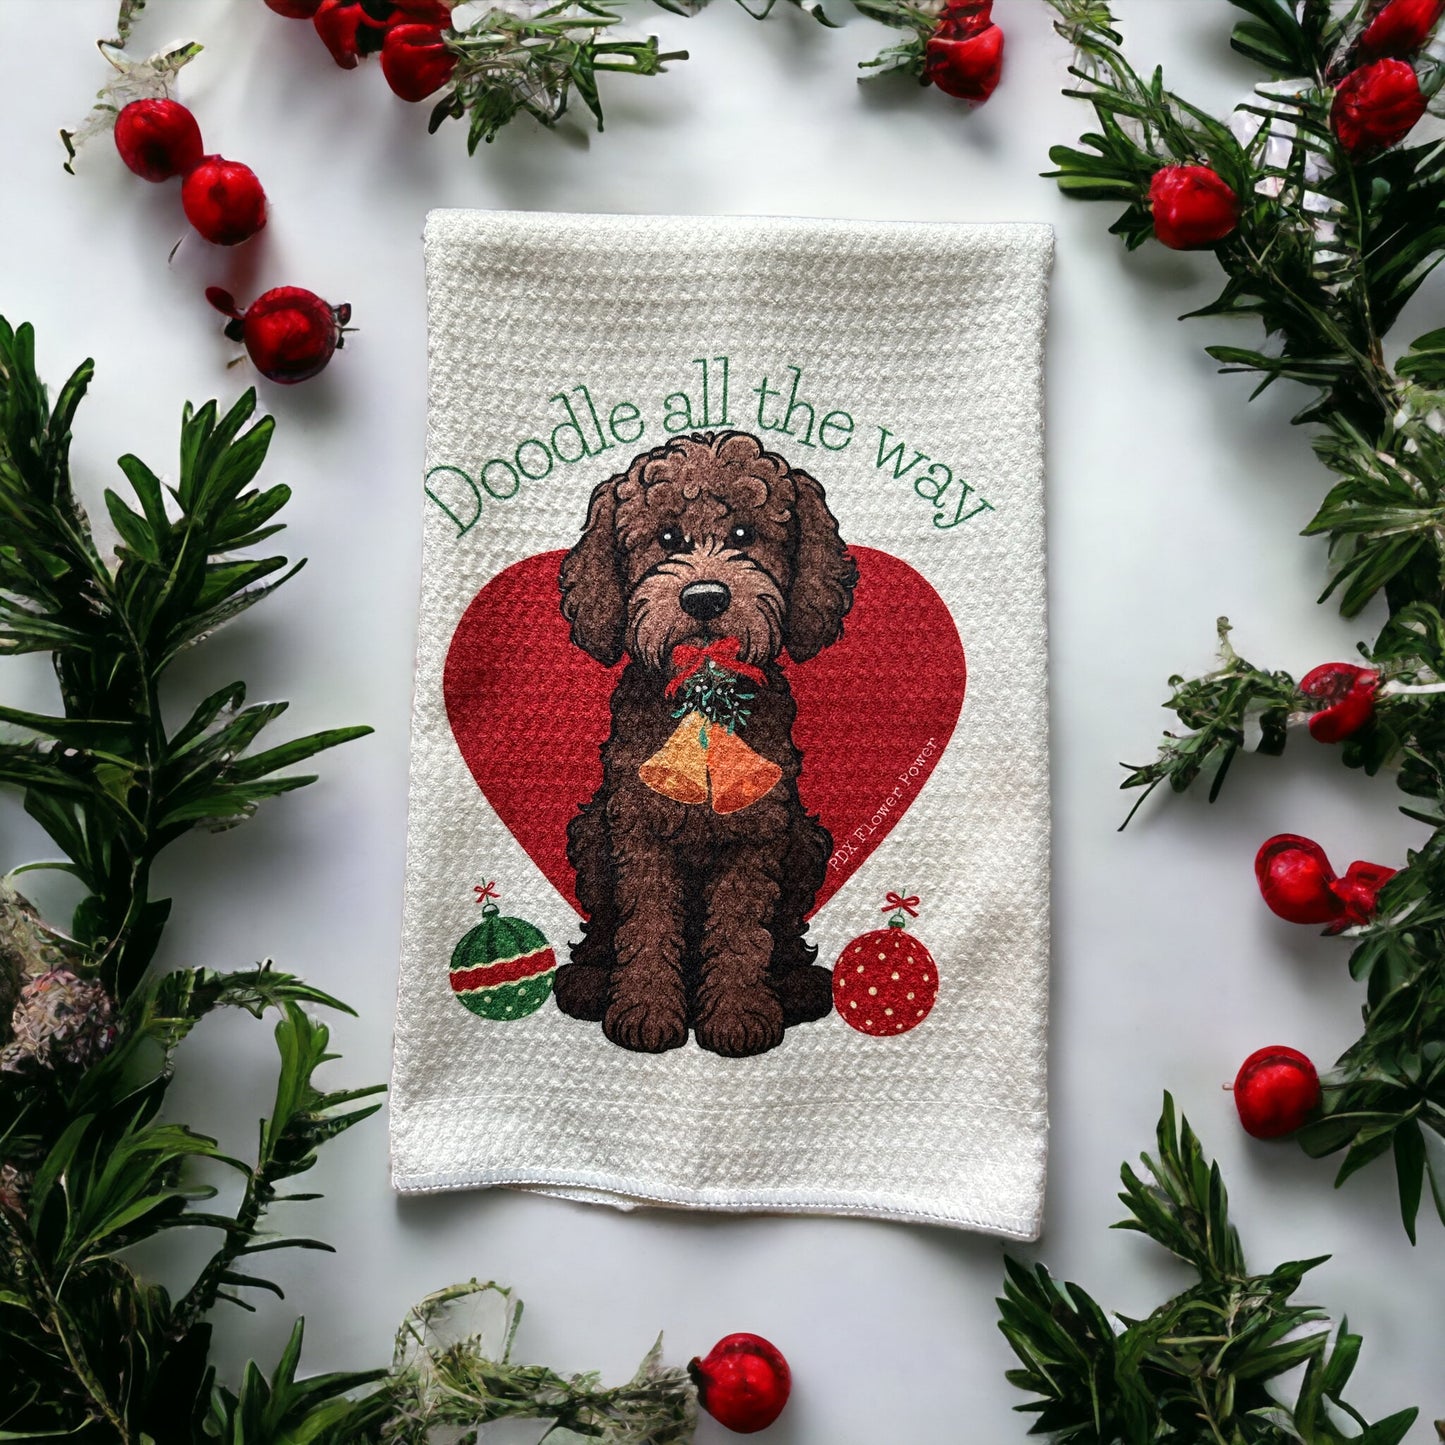 Doodle all the way waffle weave towel,  Labradoodle gifts, Goldendoodle gifts, gifts for dog lover.